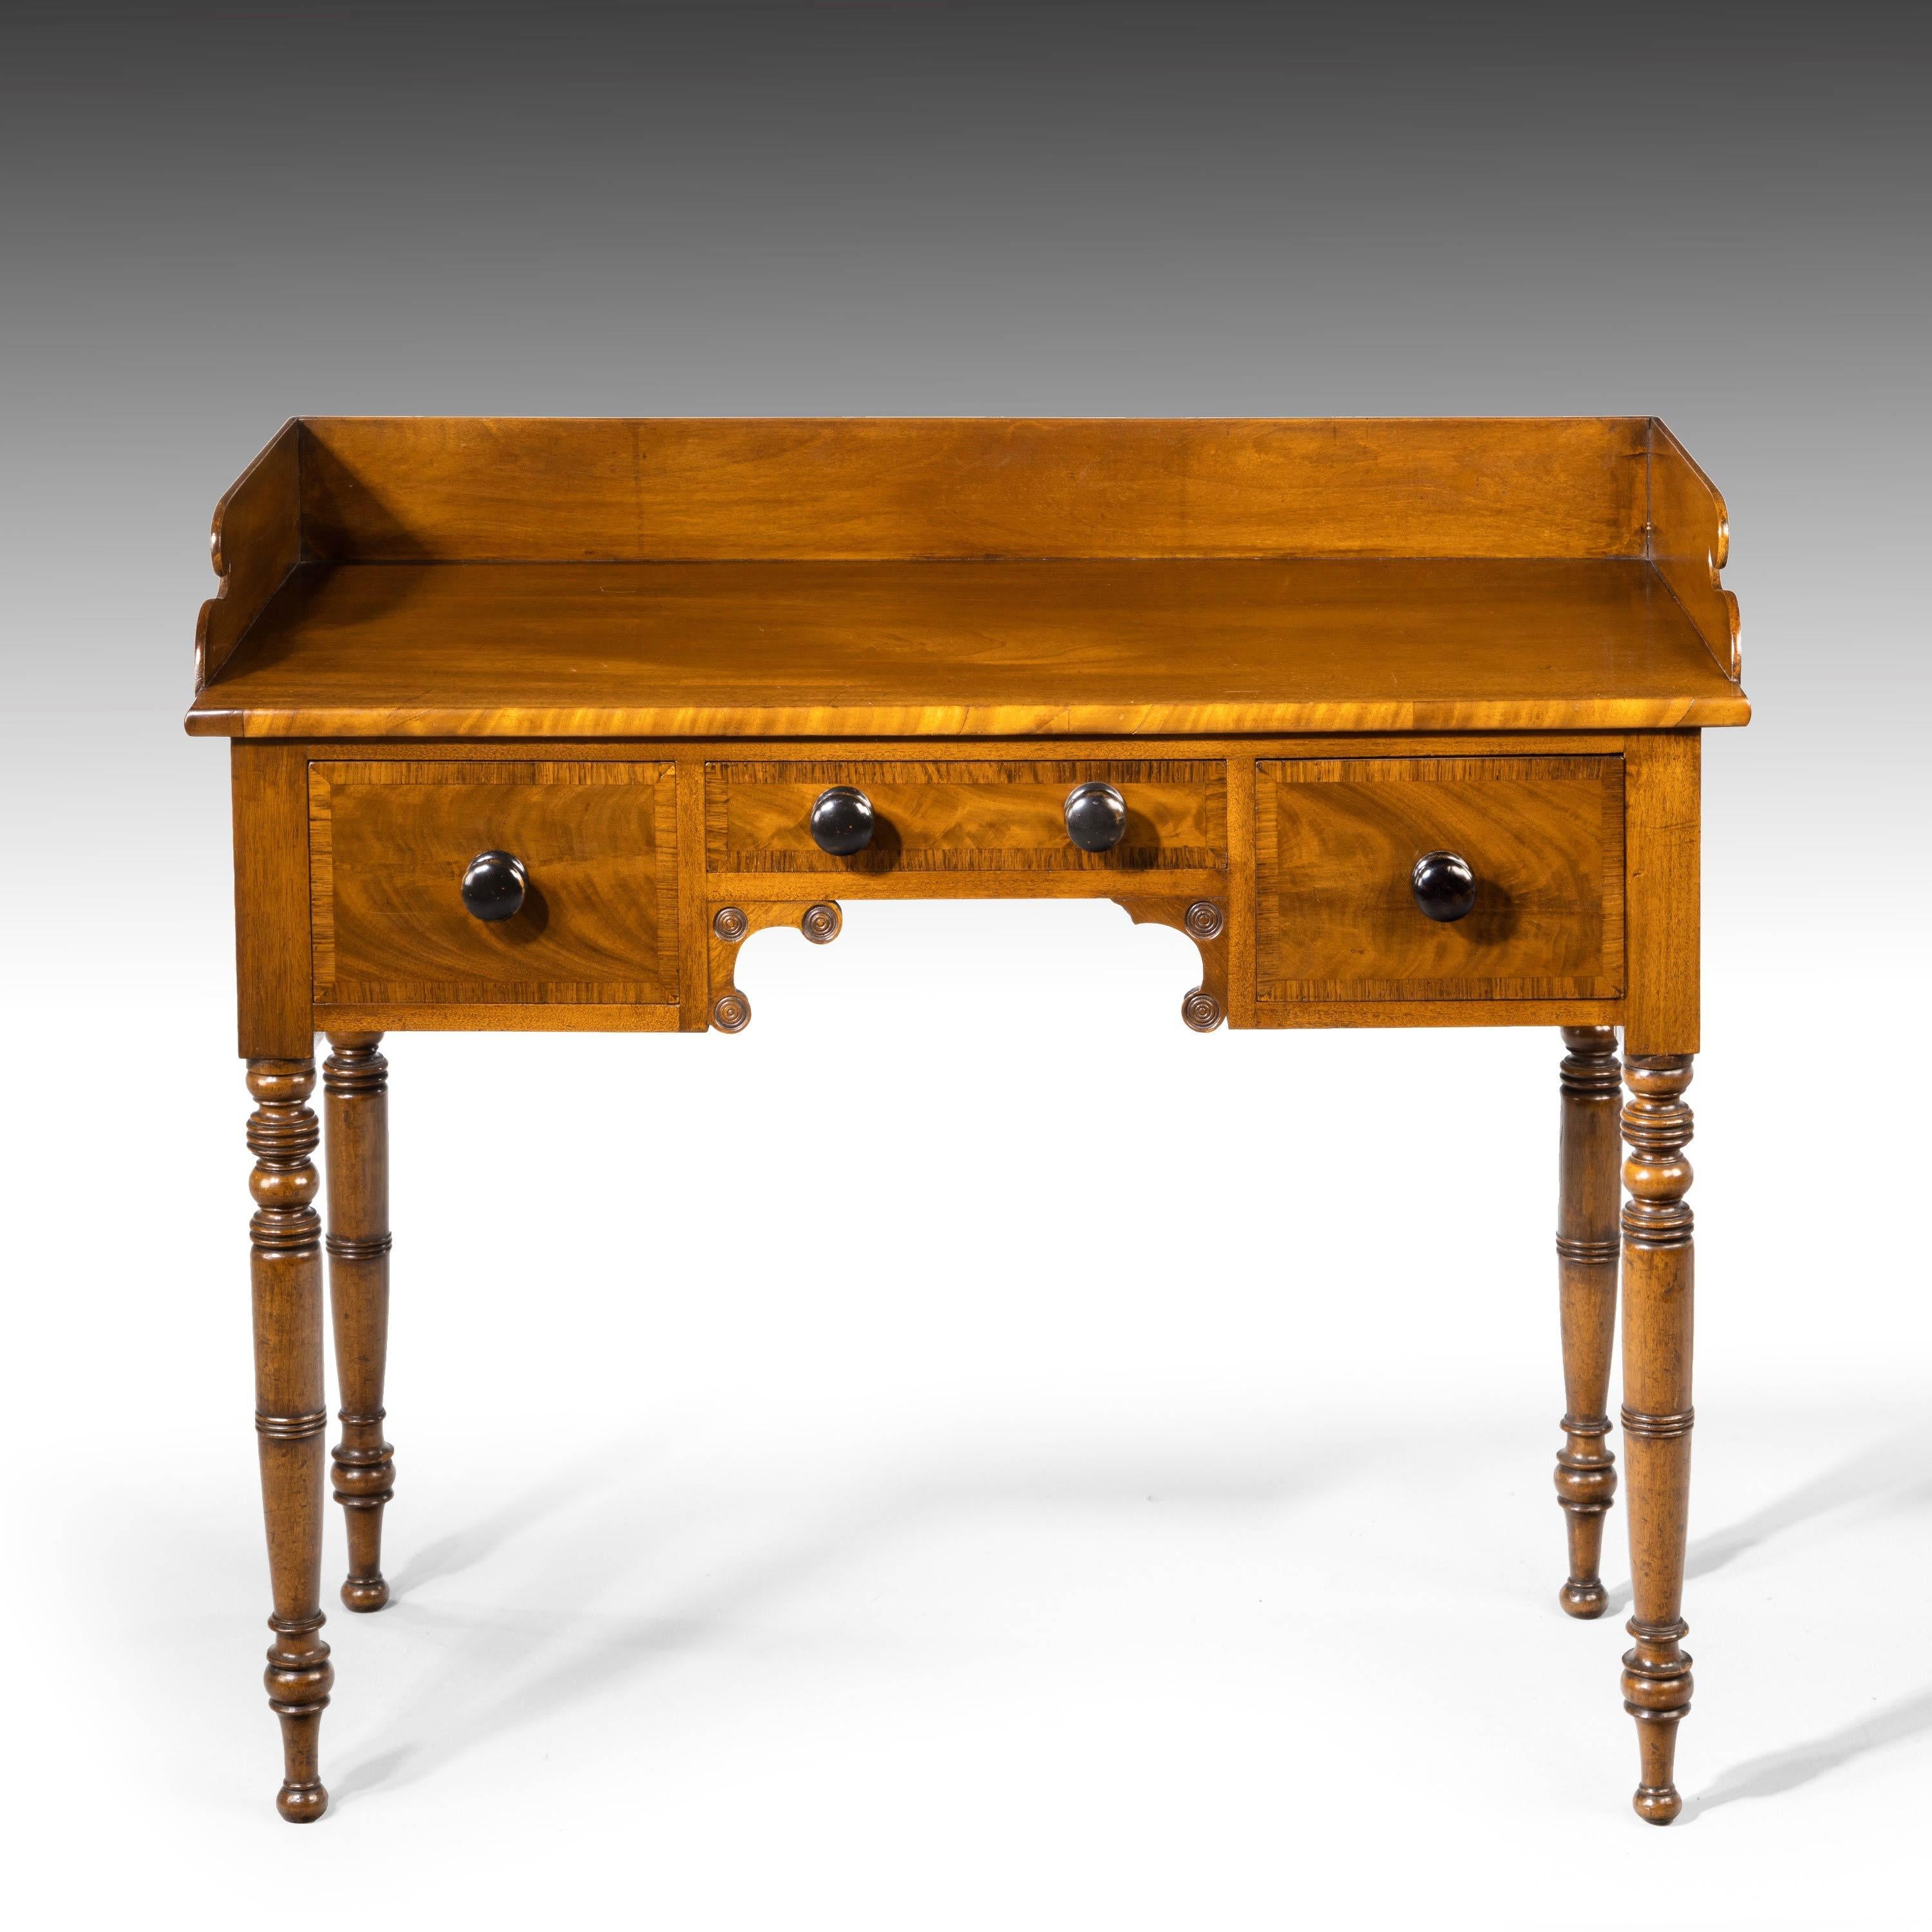 Wood William IV Period Side or Serving Table in the Manner of Gillows